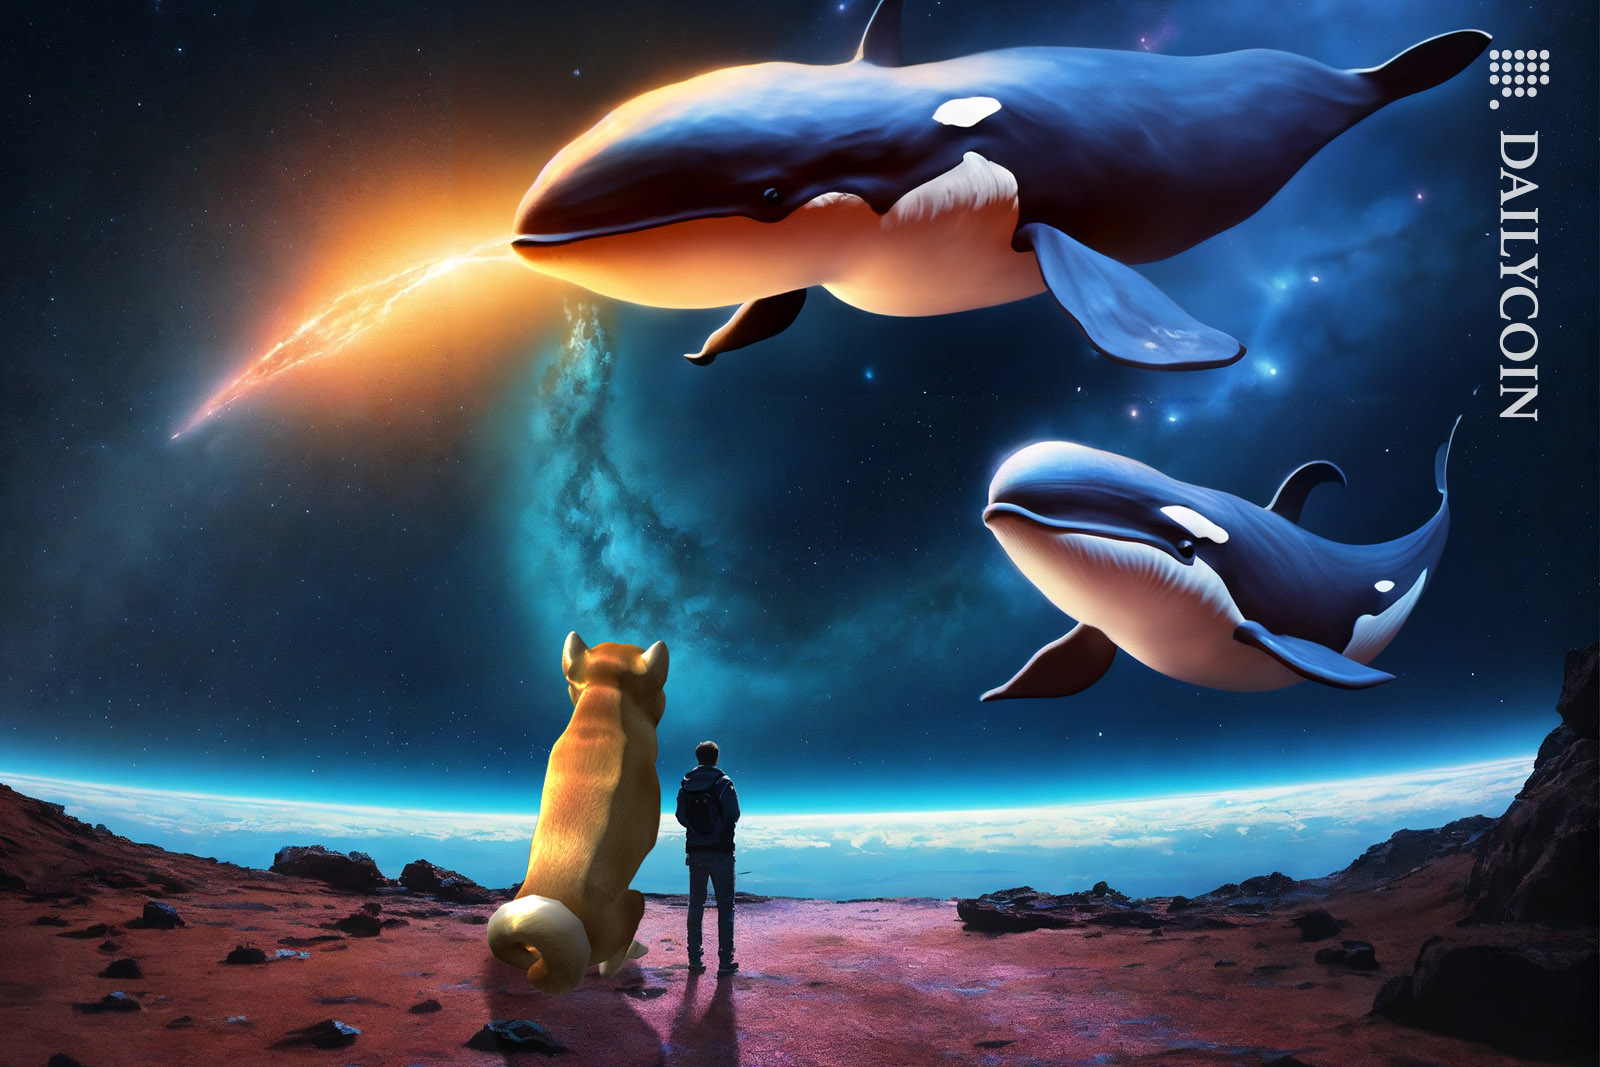 Whales in space signaling to DOGE.